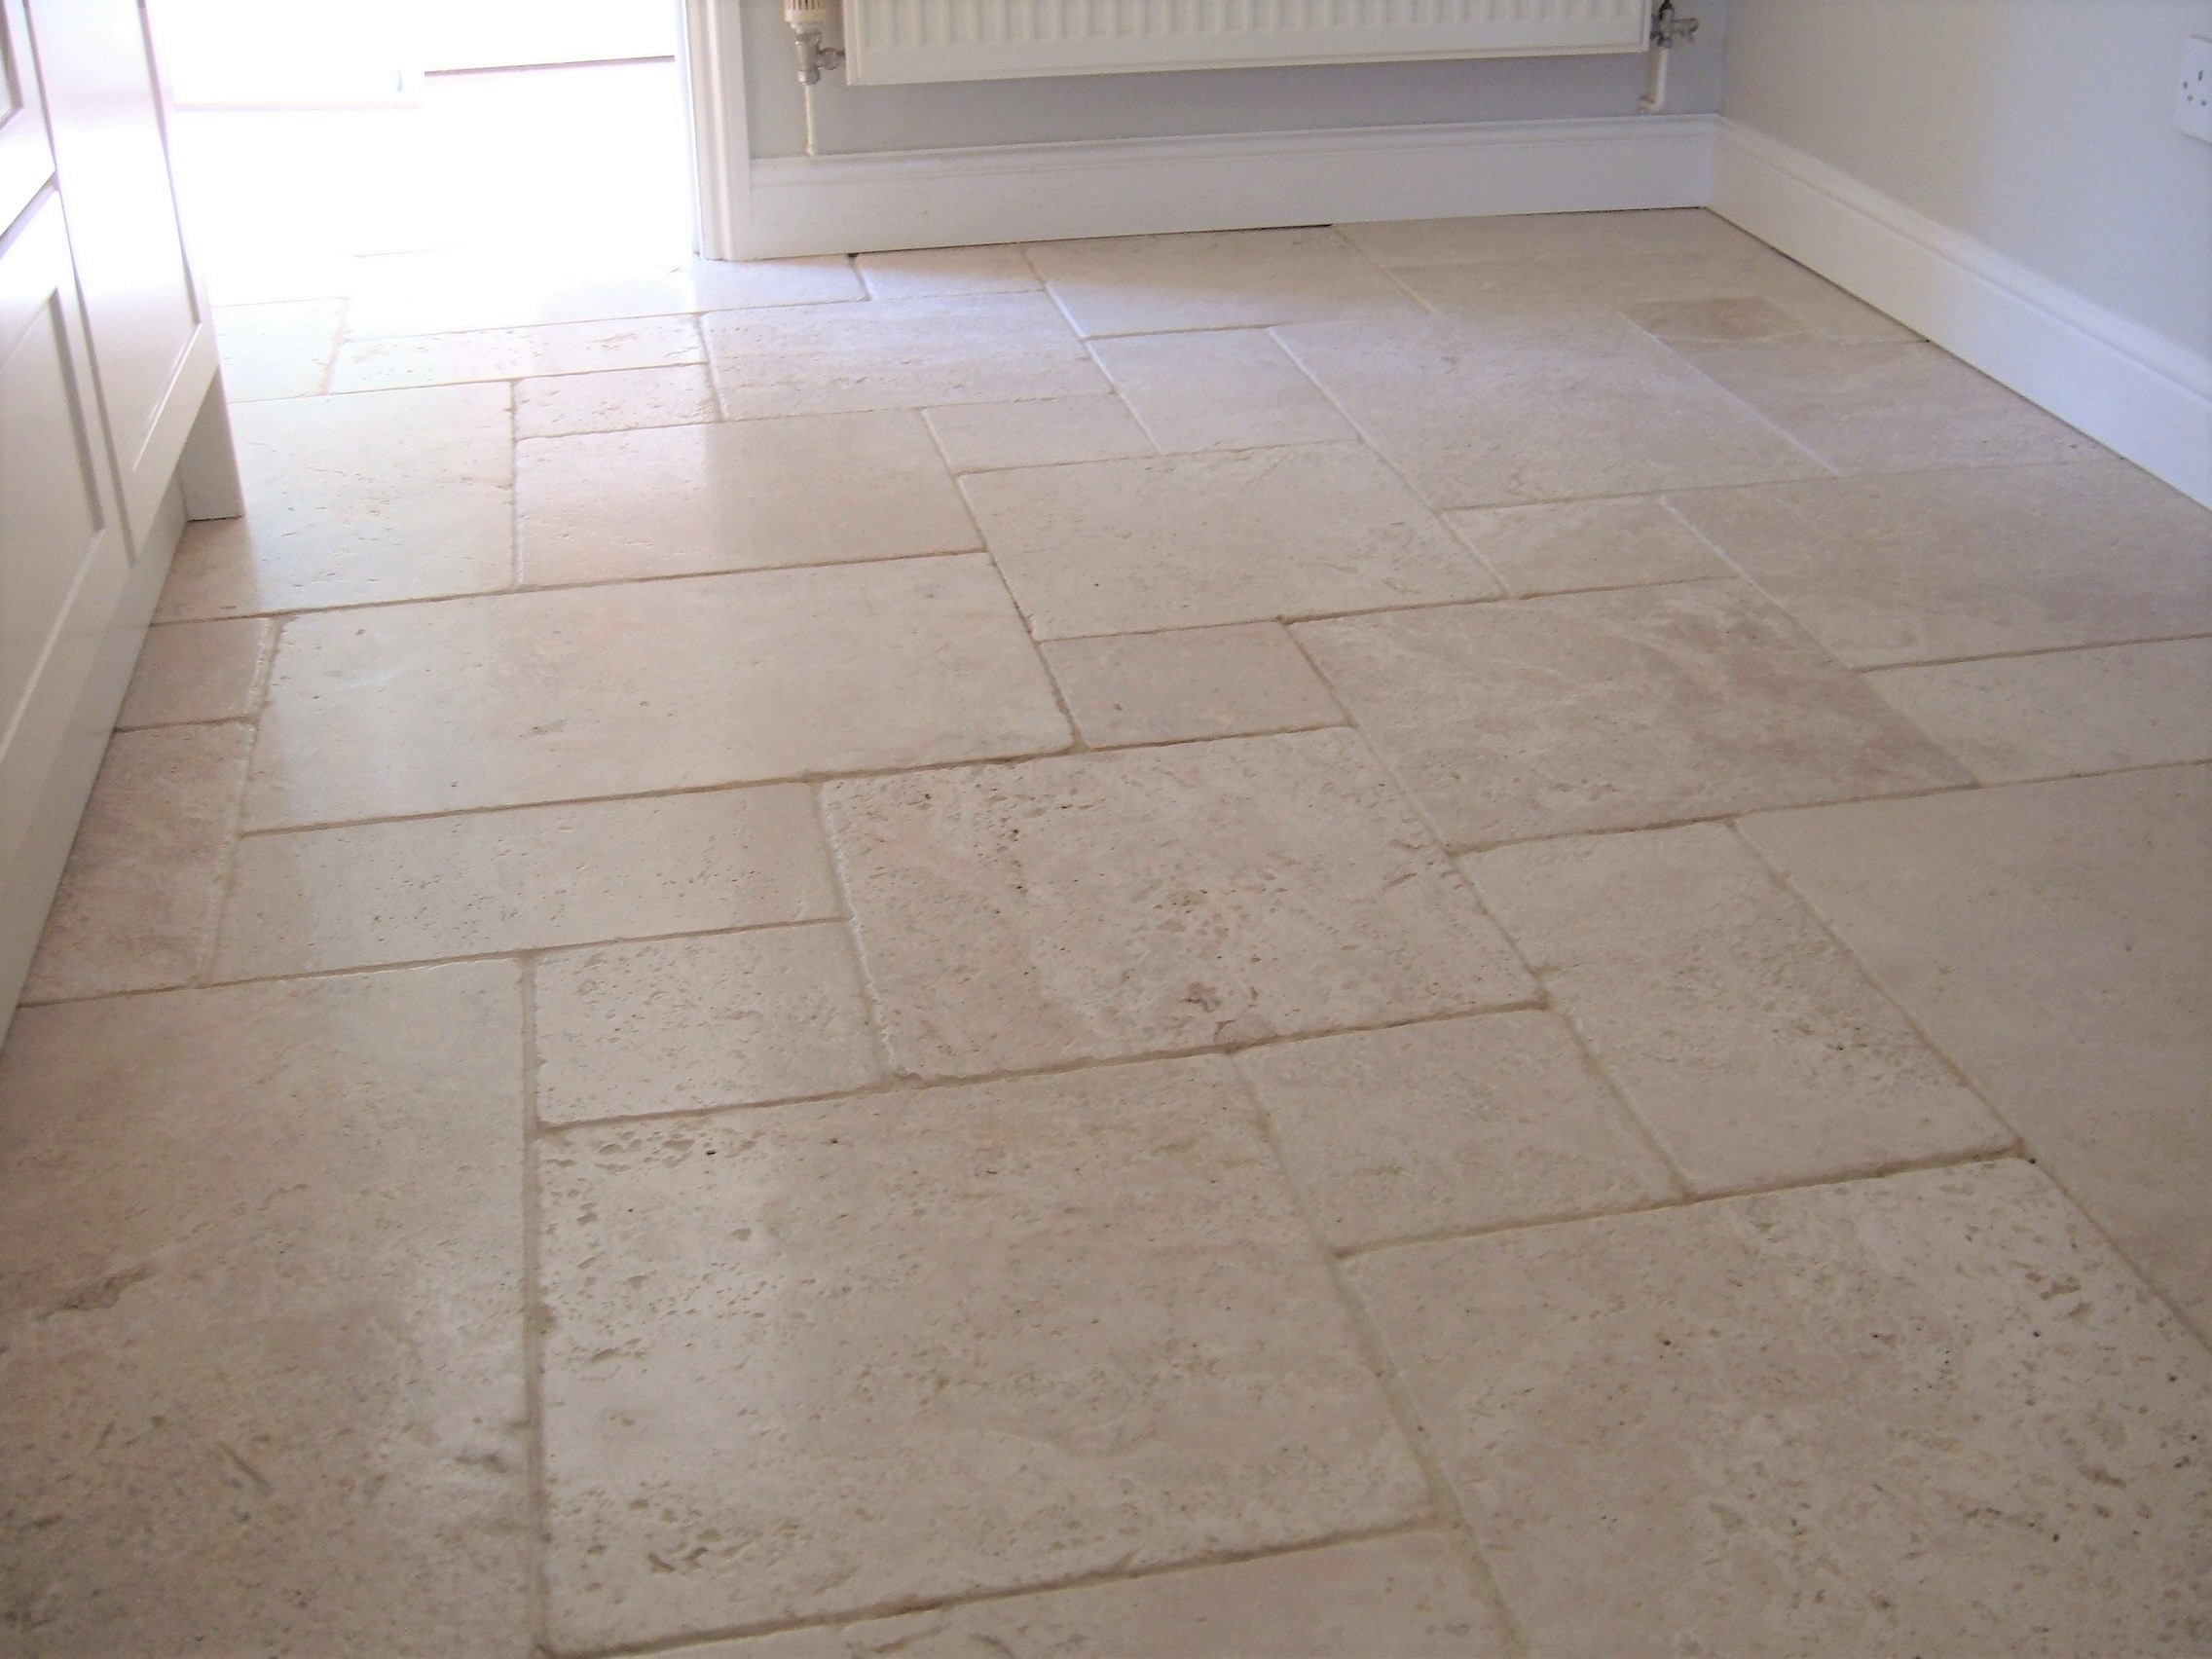 Travertine Floor in Attleborough Cleaned and Sealed